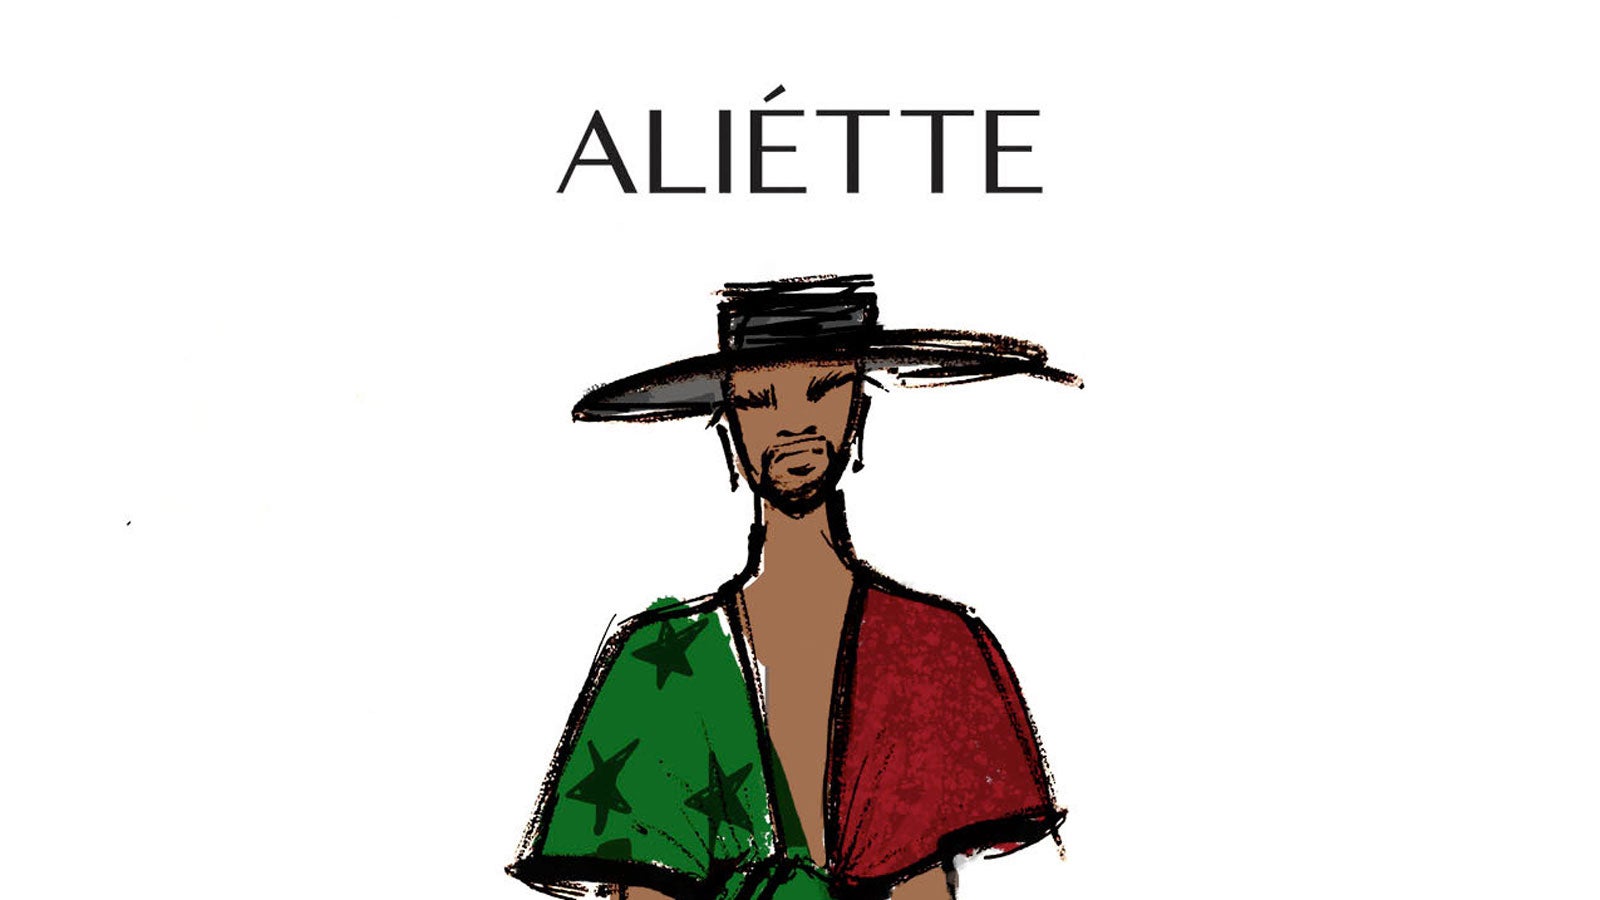 Behind The Cover: Billy Porter Wears Custom Aliétte For ESSENCE July/August 2020 Issue